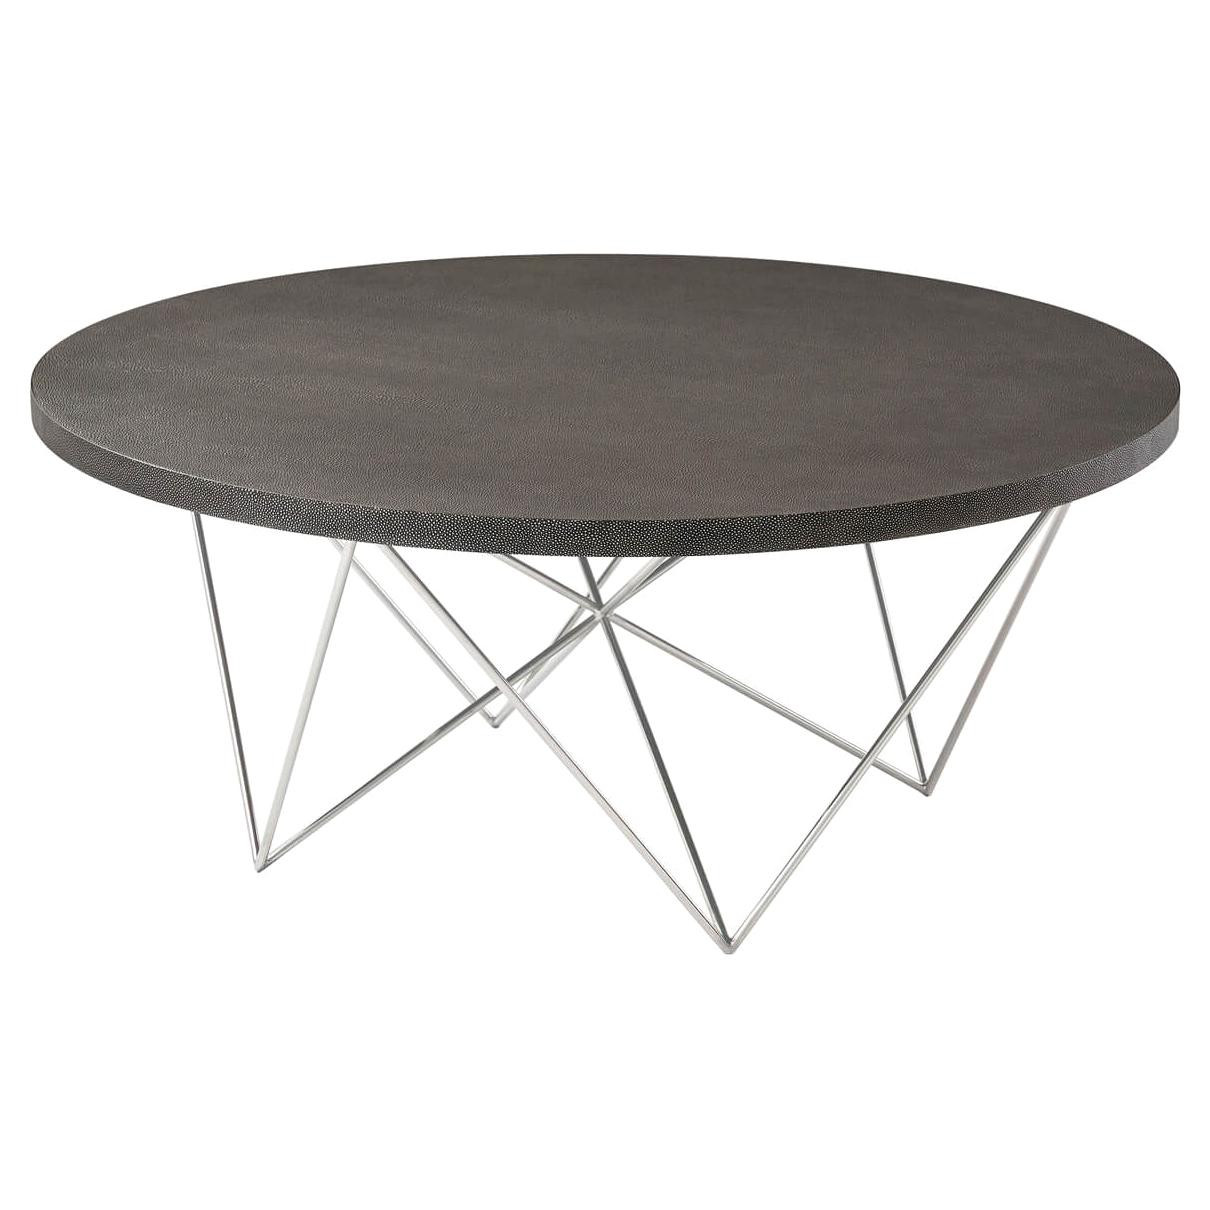 Round Leather Coffee Table